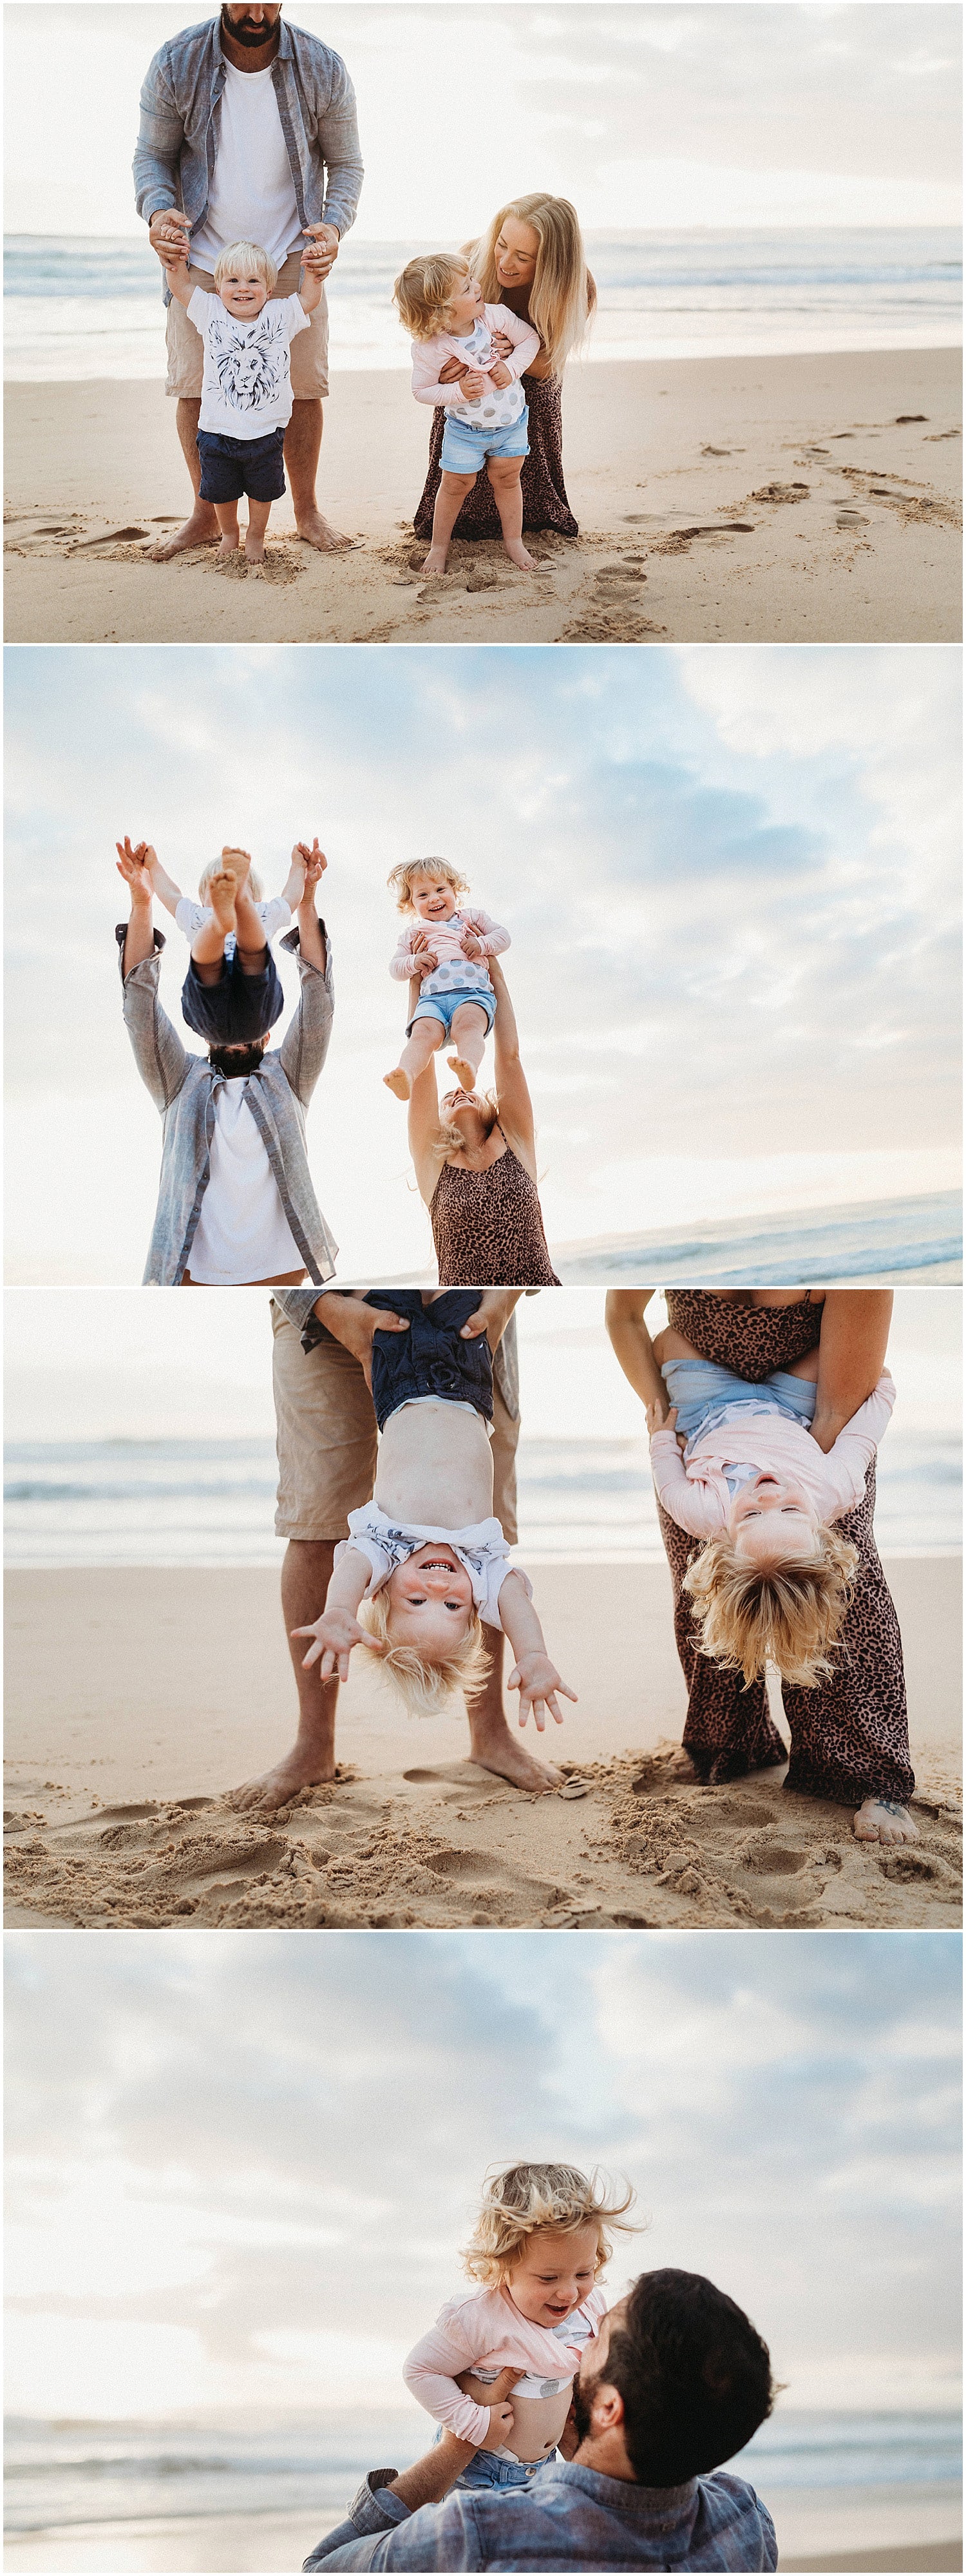 Fun_Twins_Photography_lifestyle_beach_session